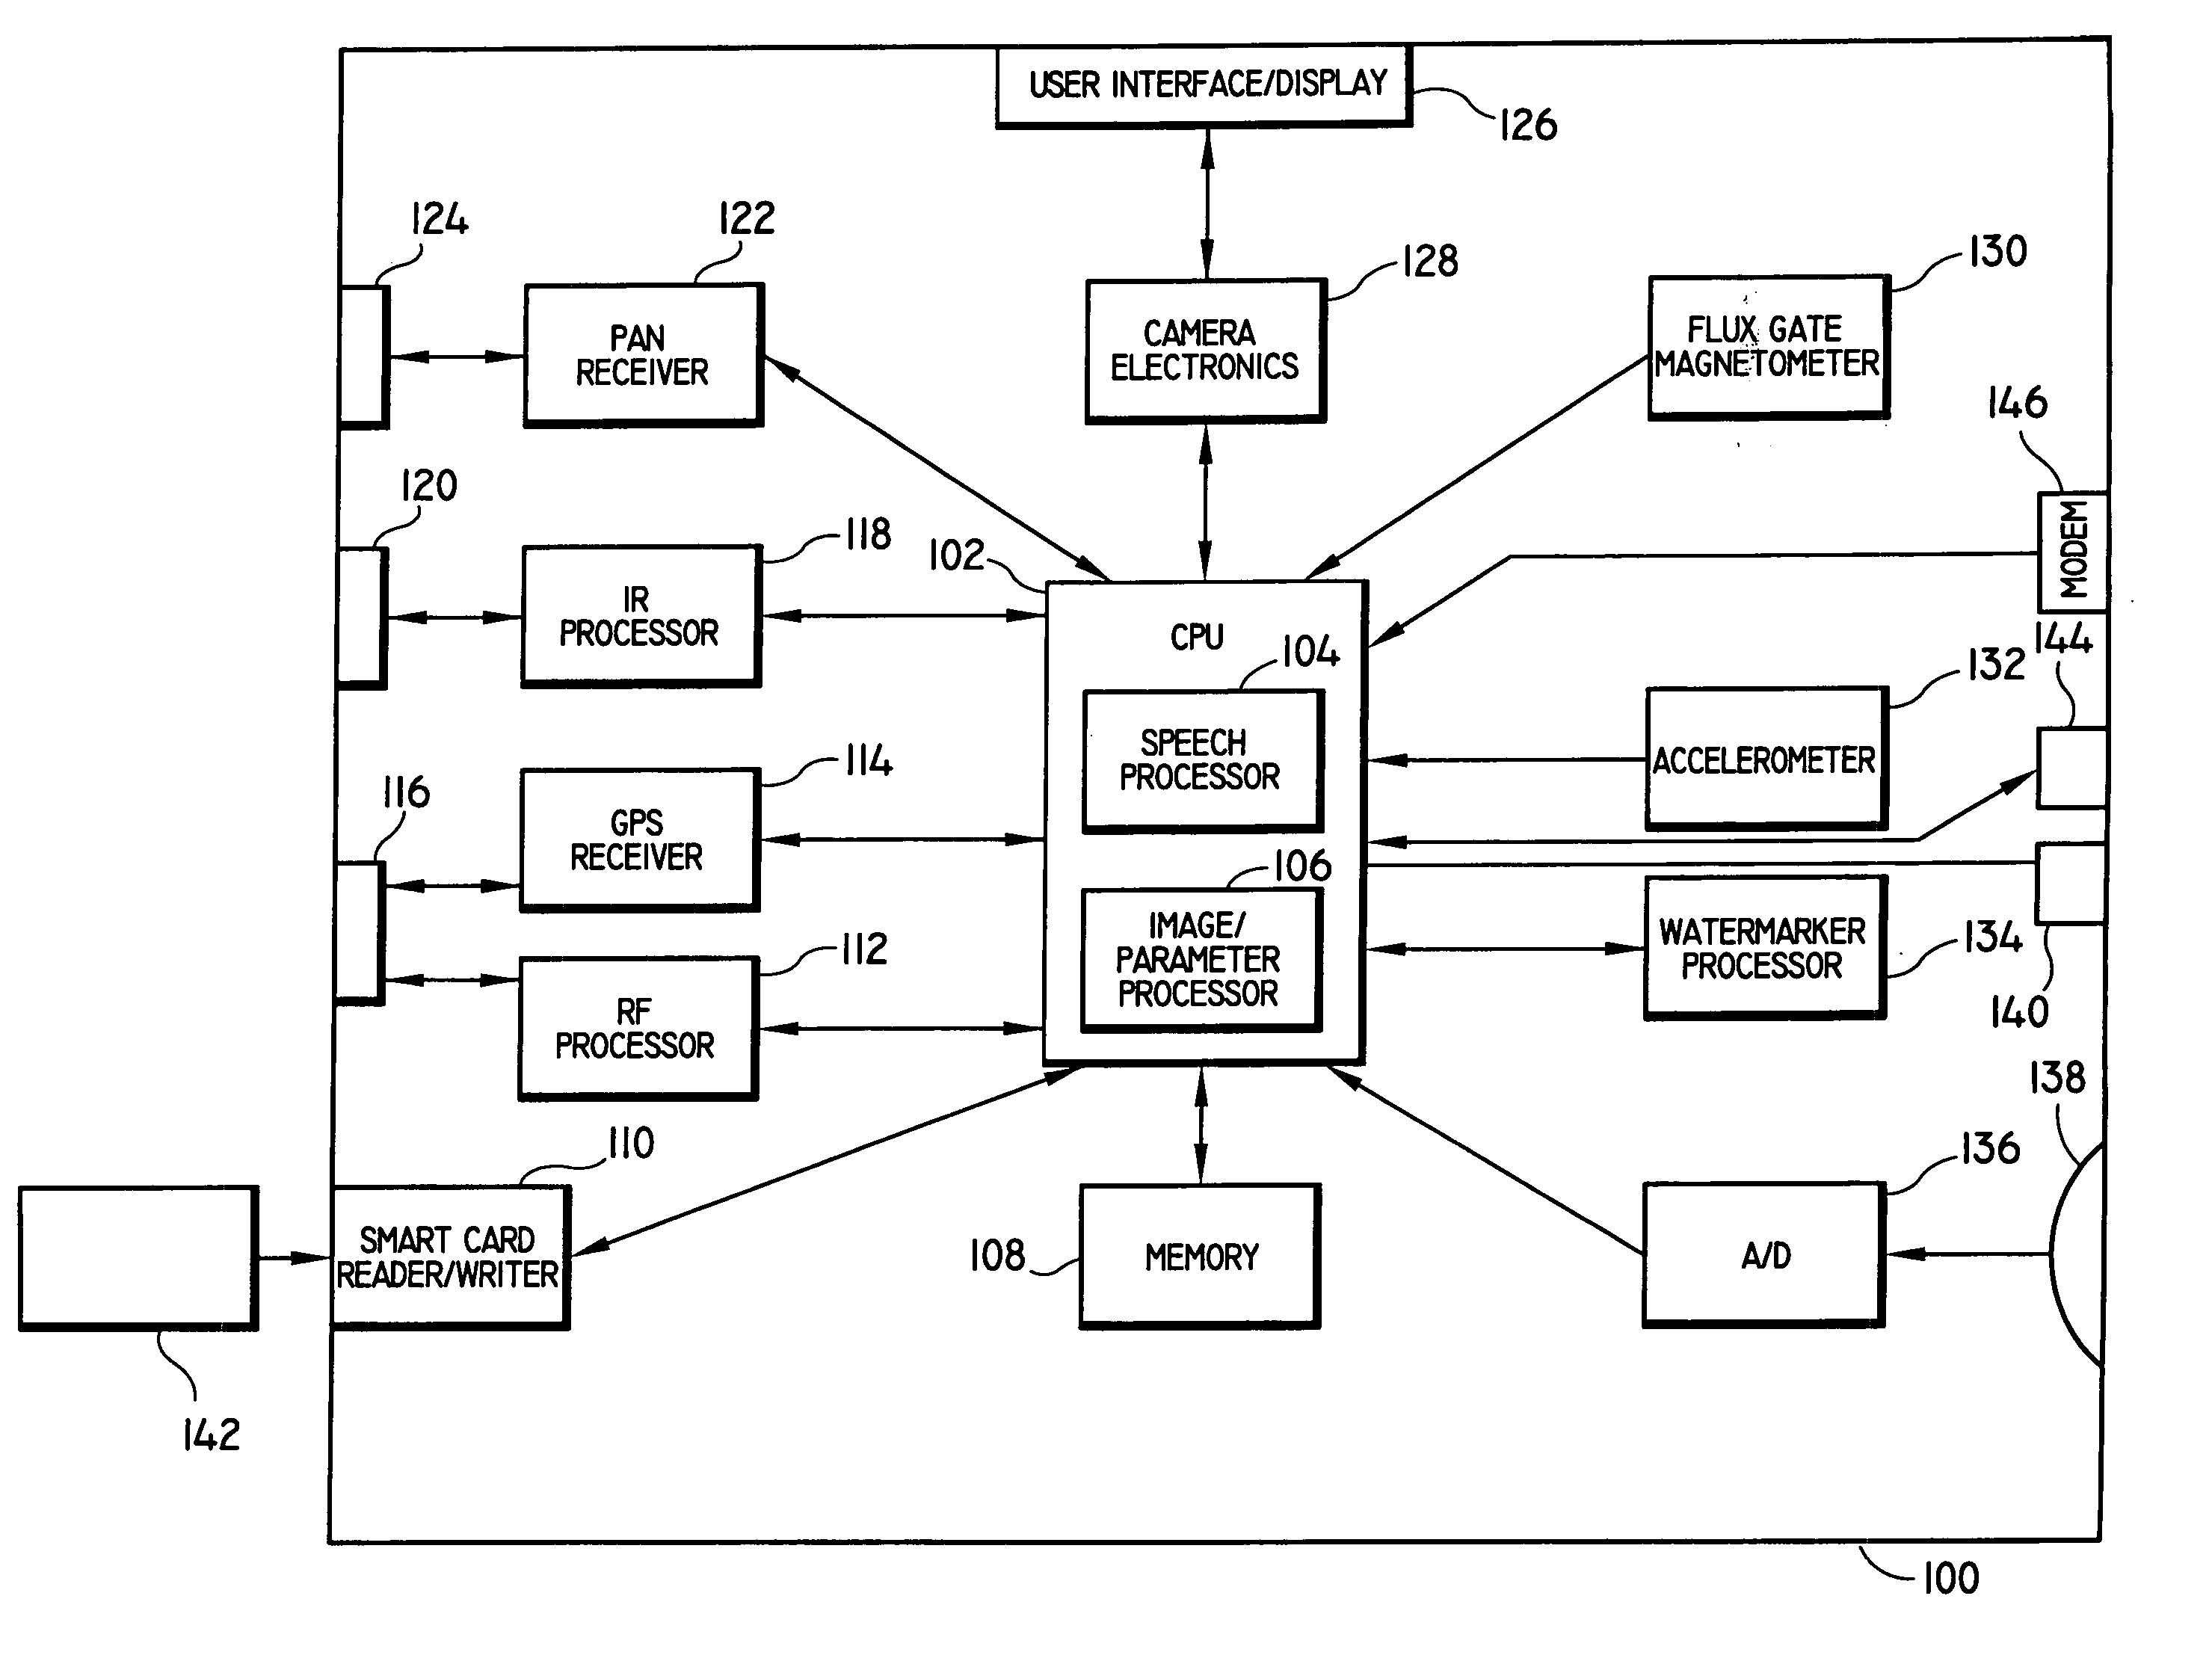 Image capturing system and method for automatically watermarking recorded parameters for providing digital image verification